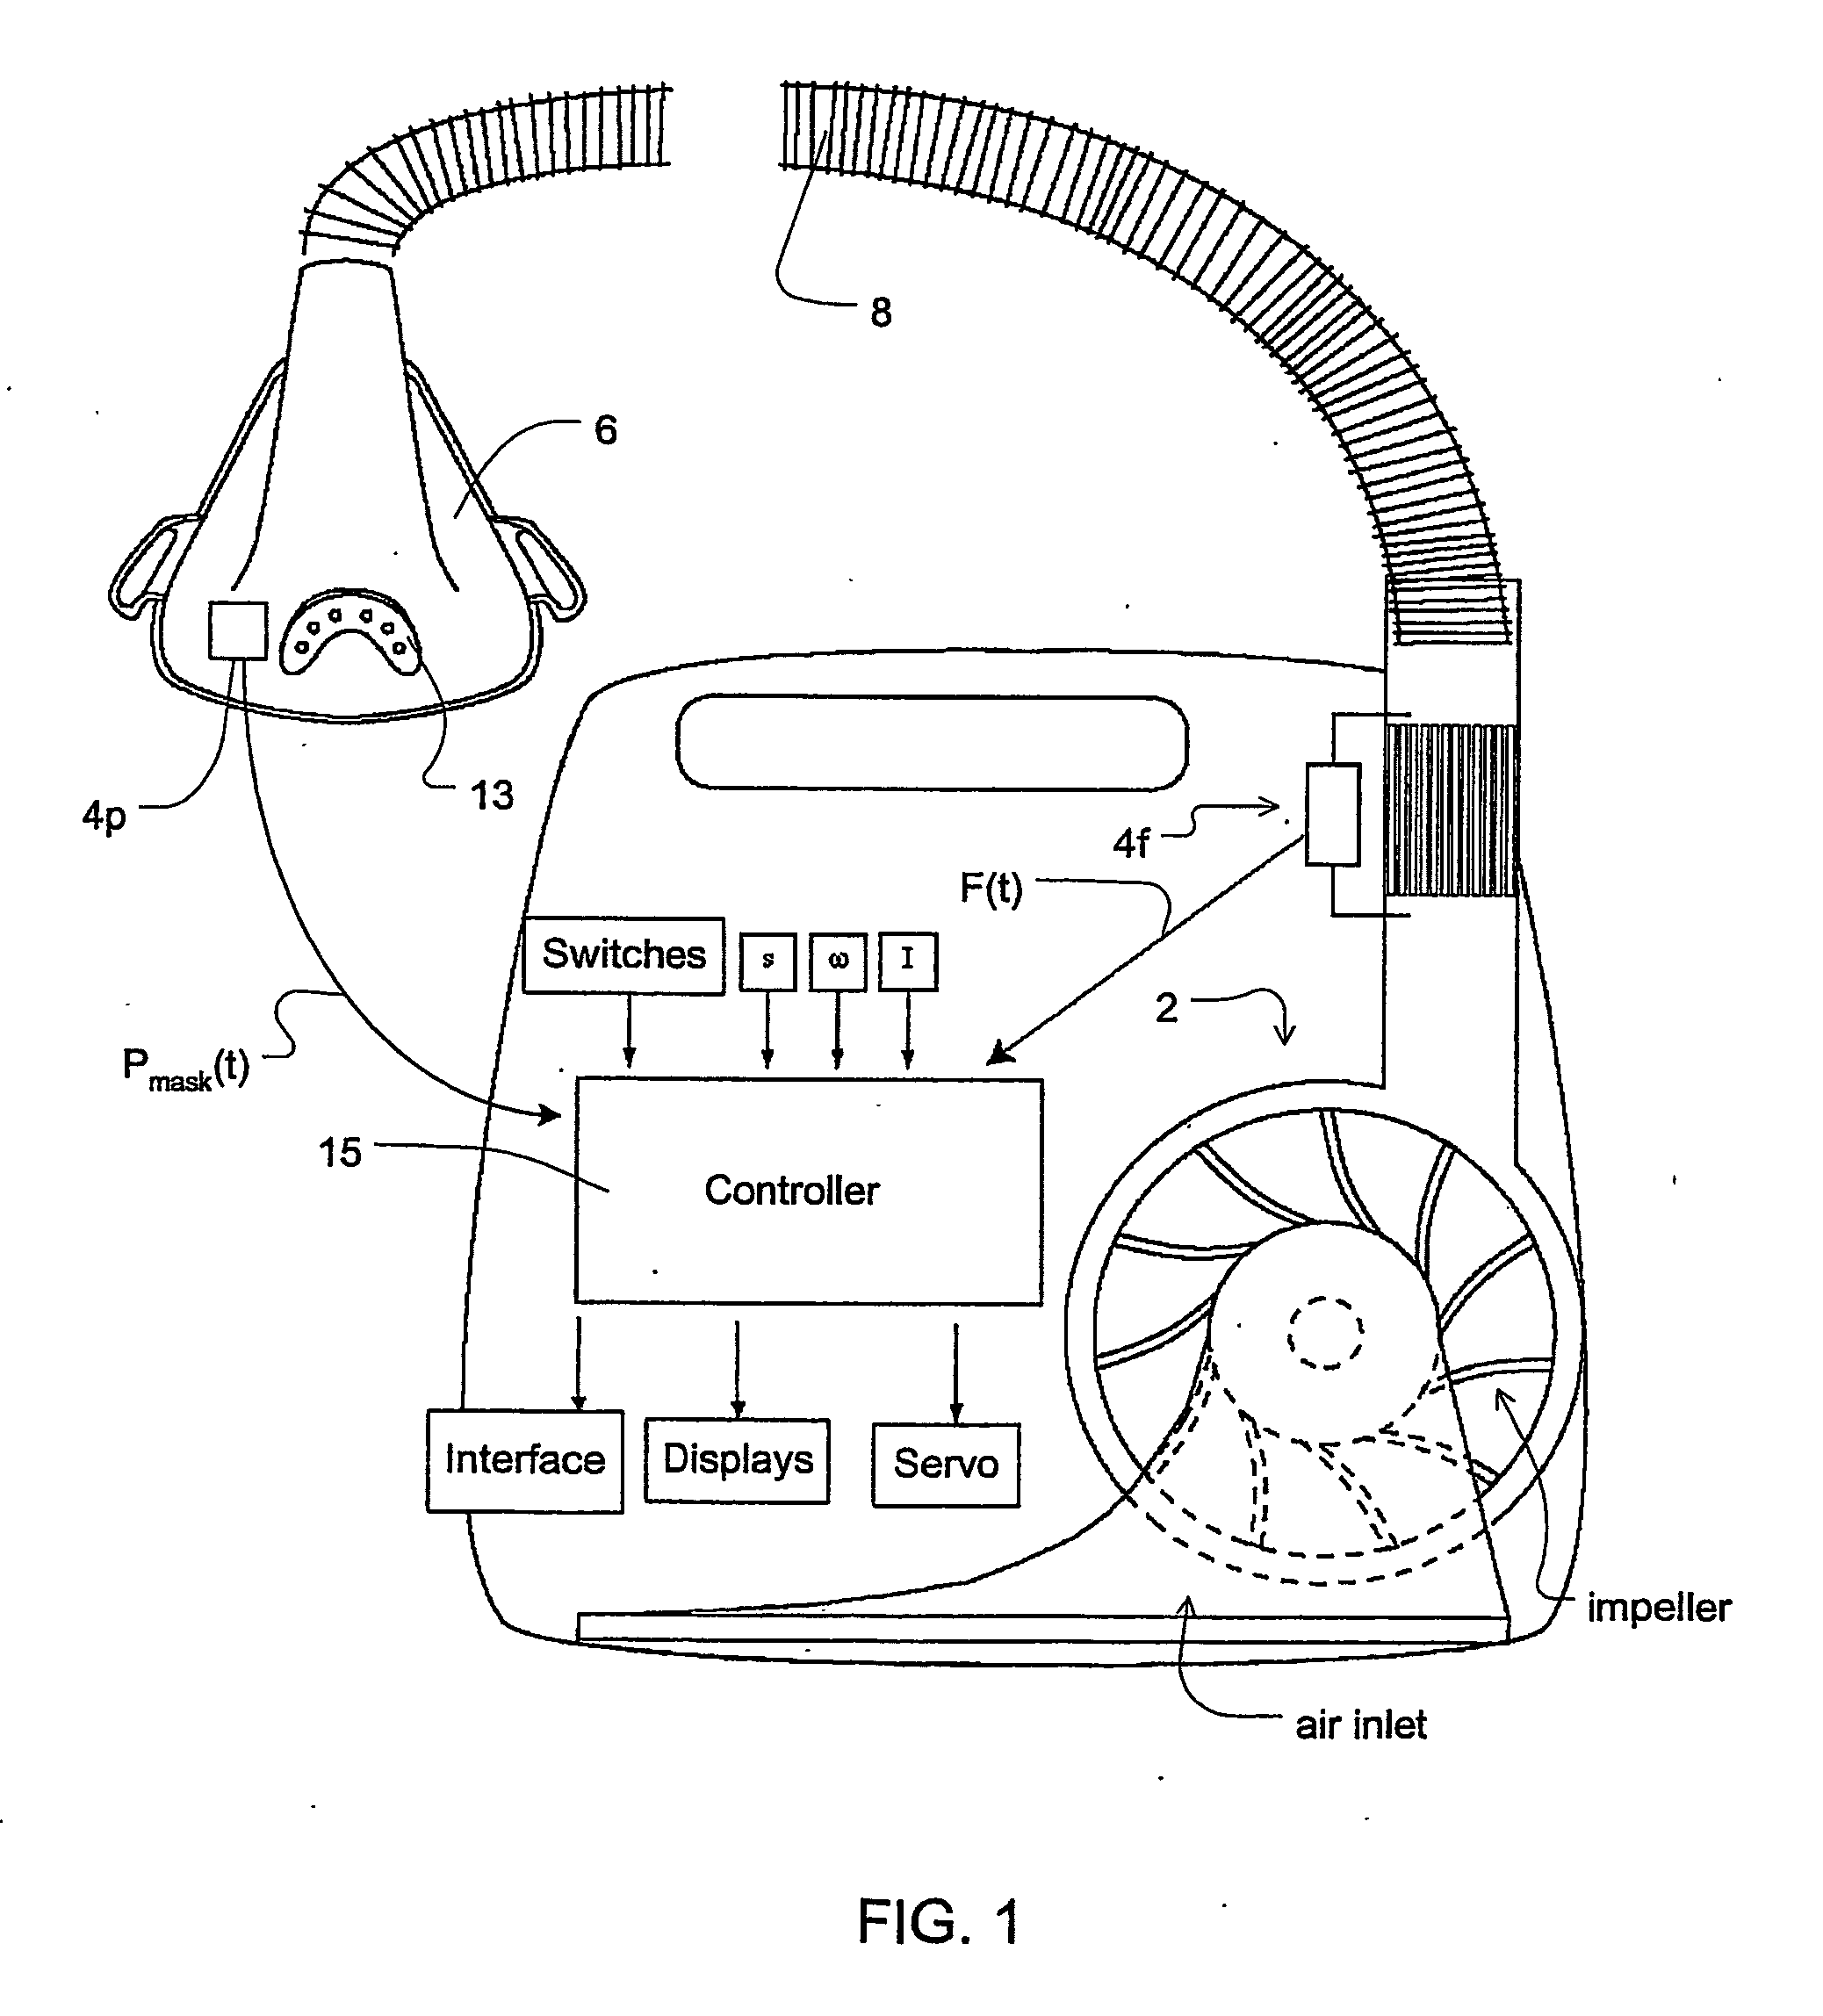 Methods and apparatus for the sytematic control of ventilatory support in the presence of respiratory insufficiency